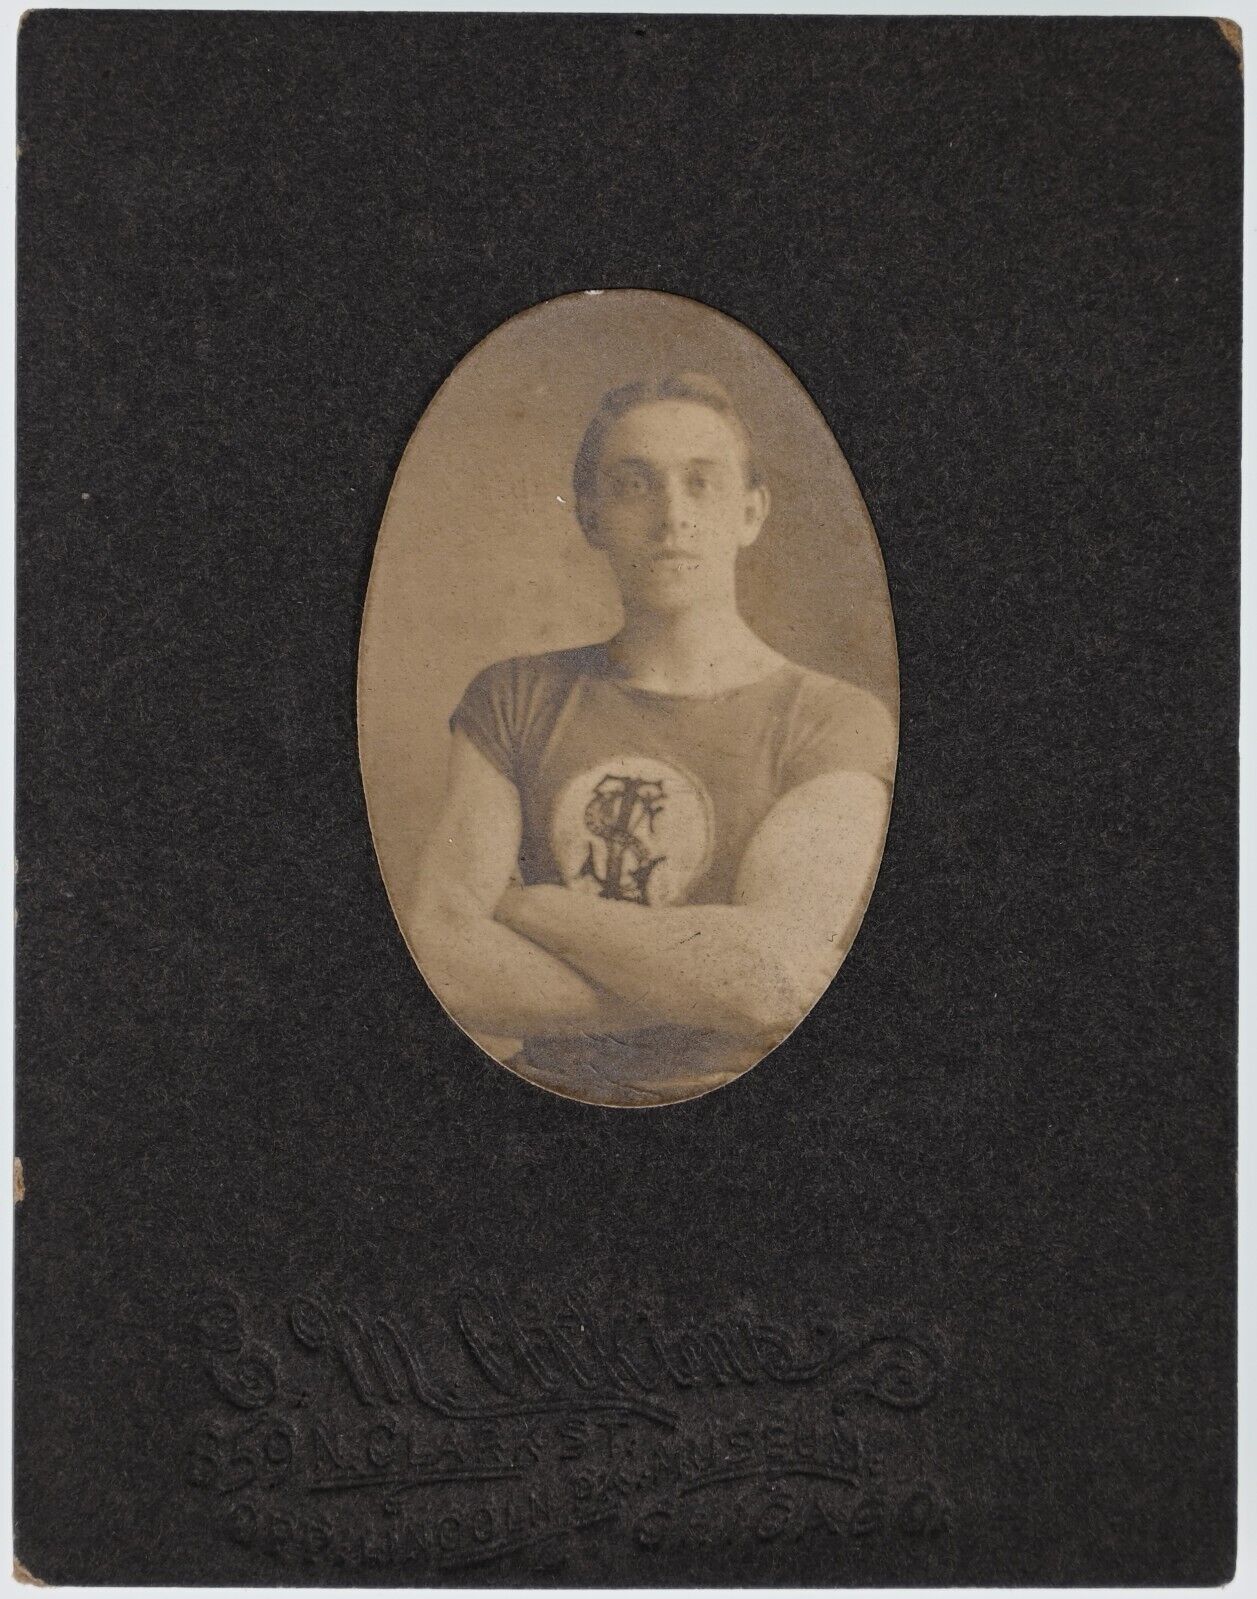 ANTIQUE CDV CIRCA 1900s HANDSOME COLLEGE? MAN ON ROWING TEAM BIG ARMS CHICAGO IL